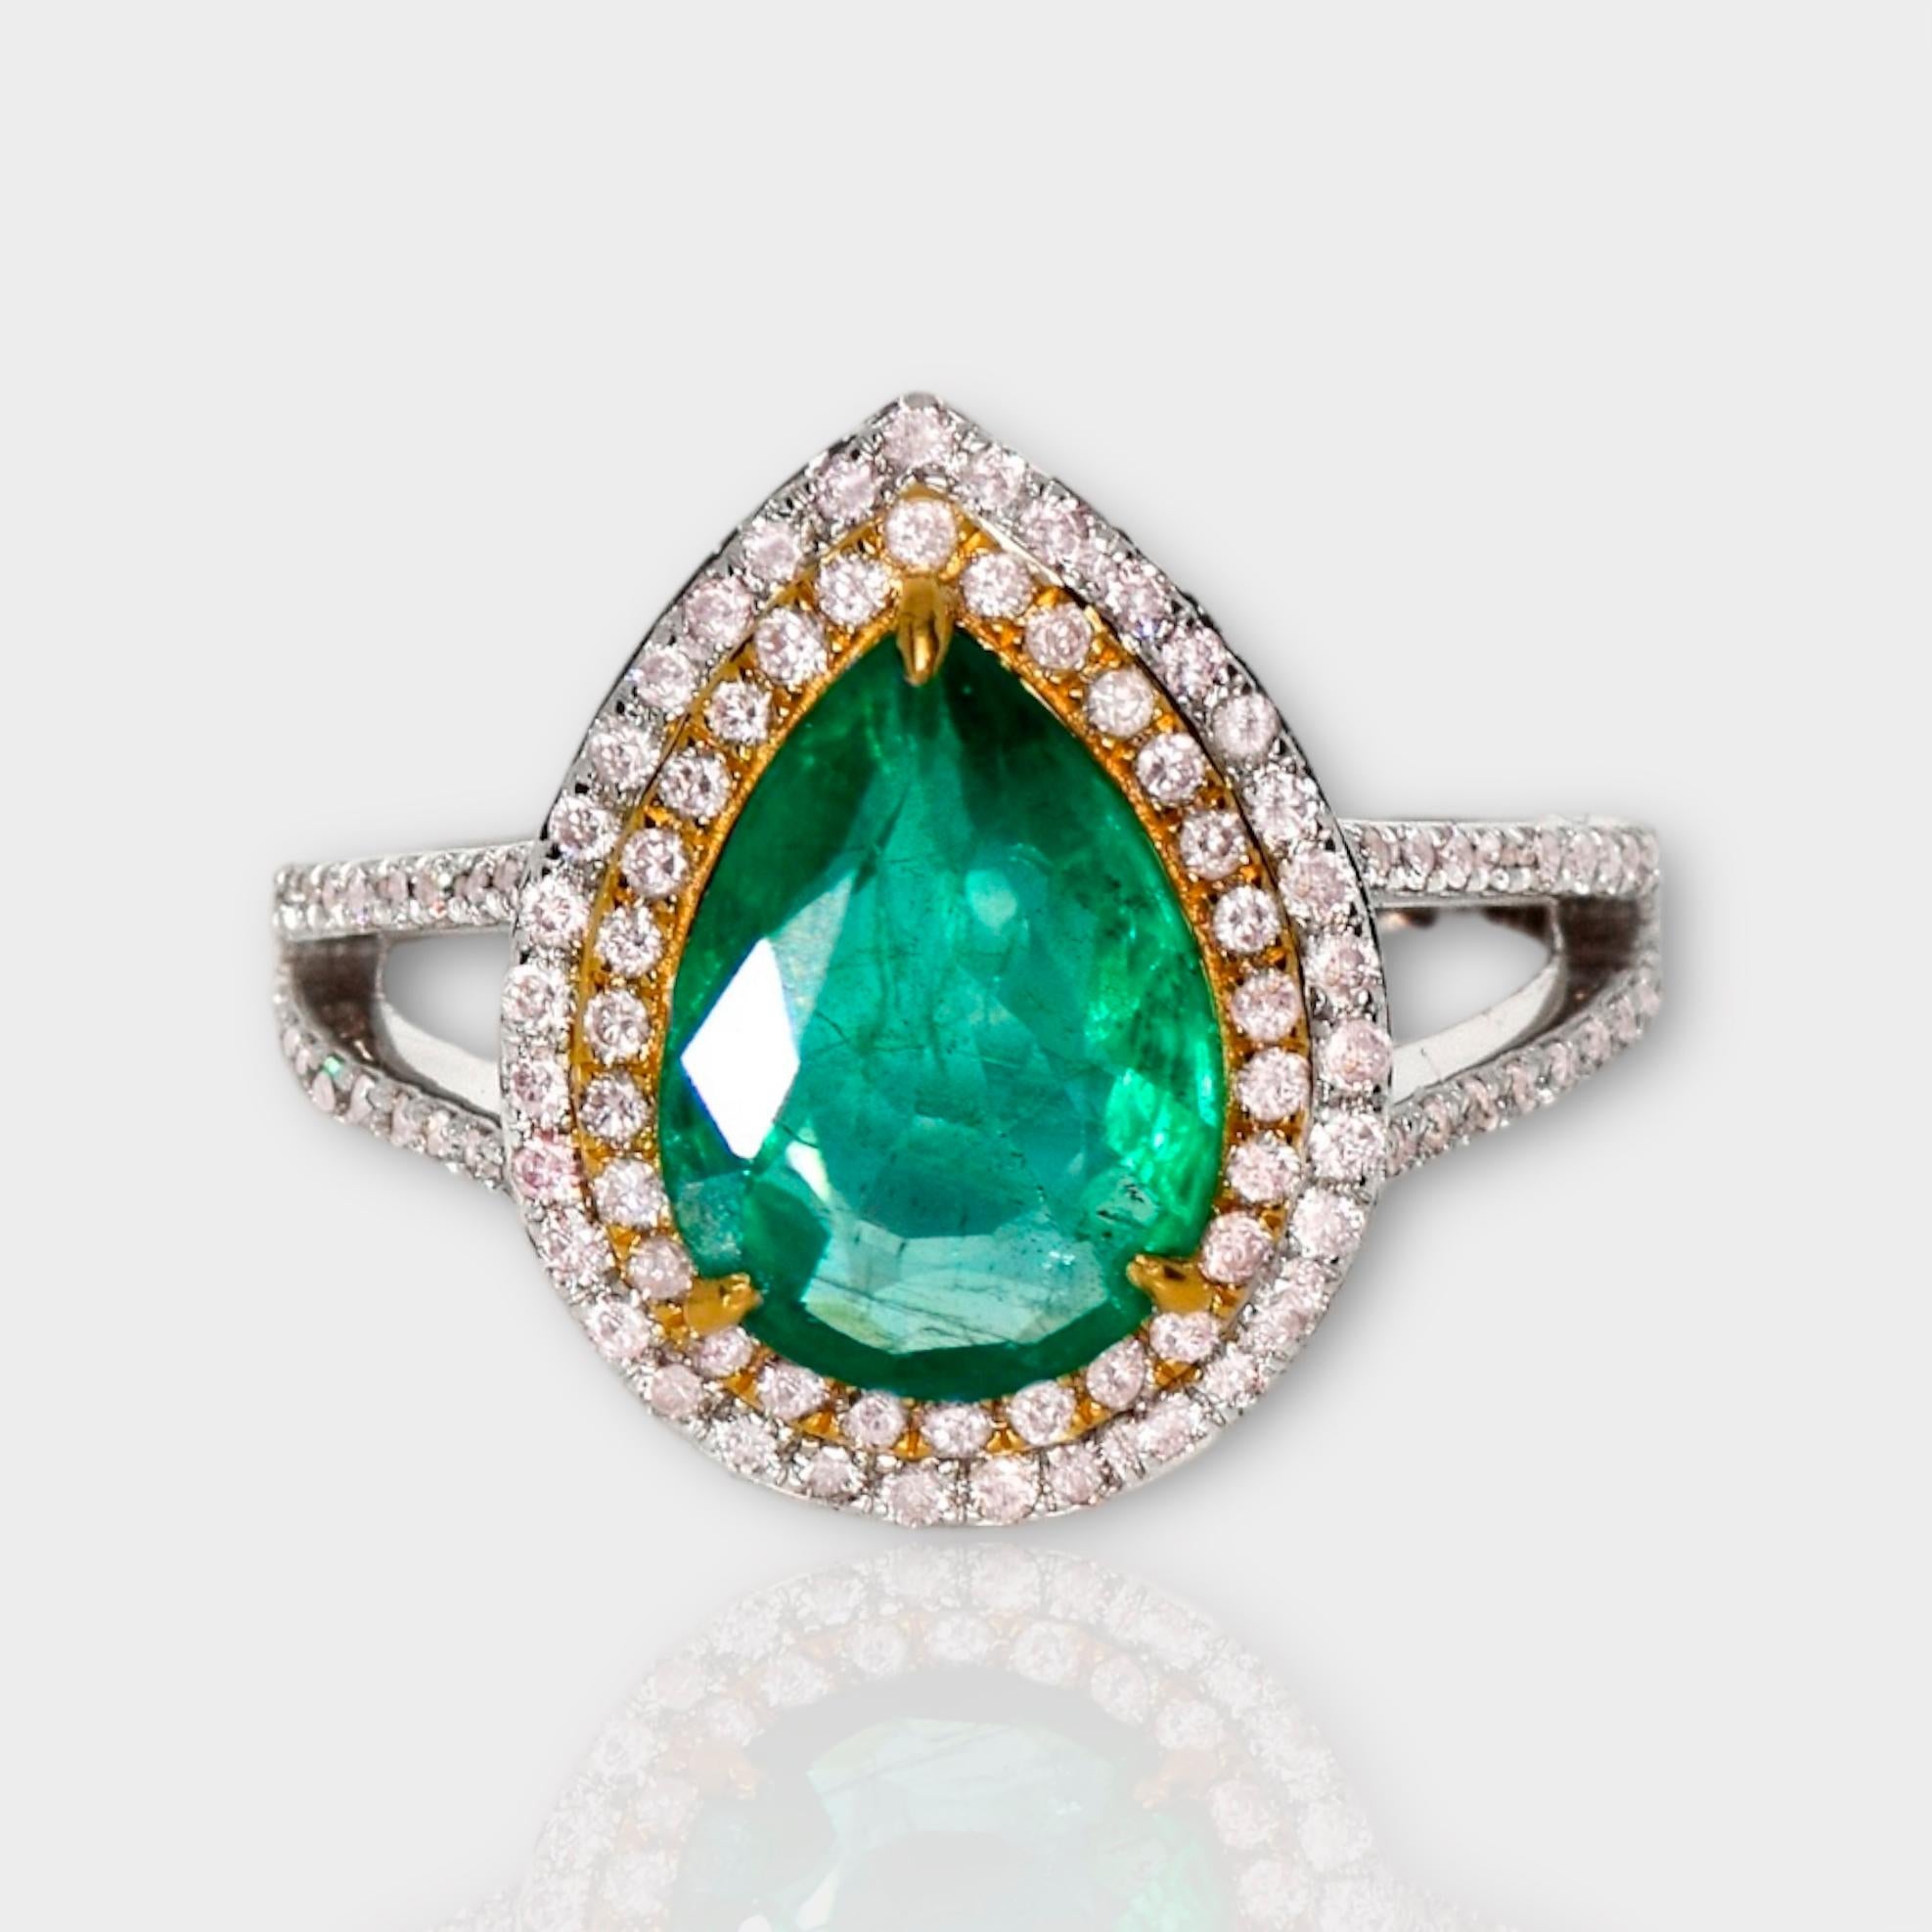 **IGI 18K Dual-color Gold 2.42 ct Emerald&Pink Diamonds Antique Art Deco Style Engagement Ring** 

An IGI-certified natural Zambia green emerald weighing 2.42 ct is set on an 18K dual-color gold arc deco design band with natural pink diamonds